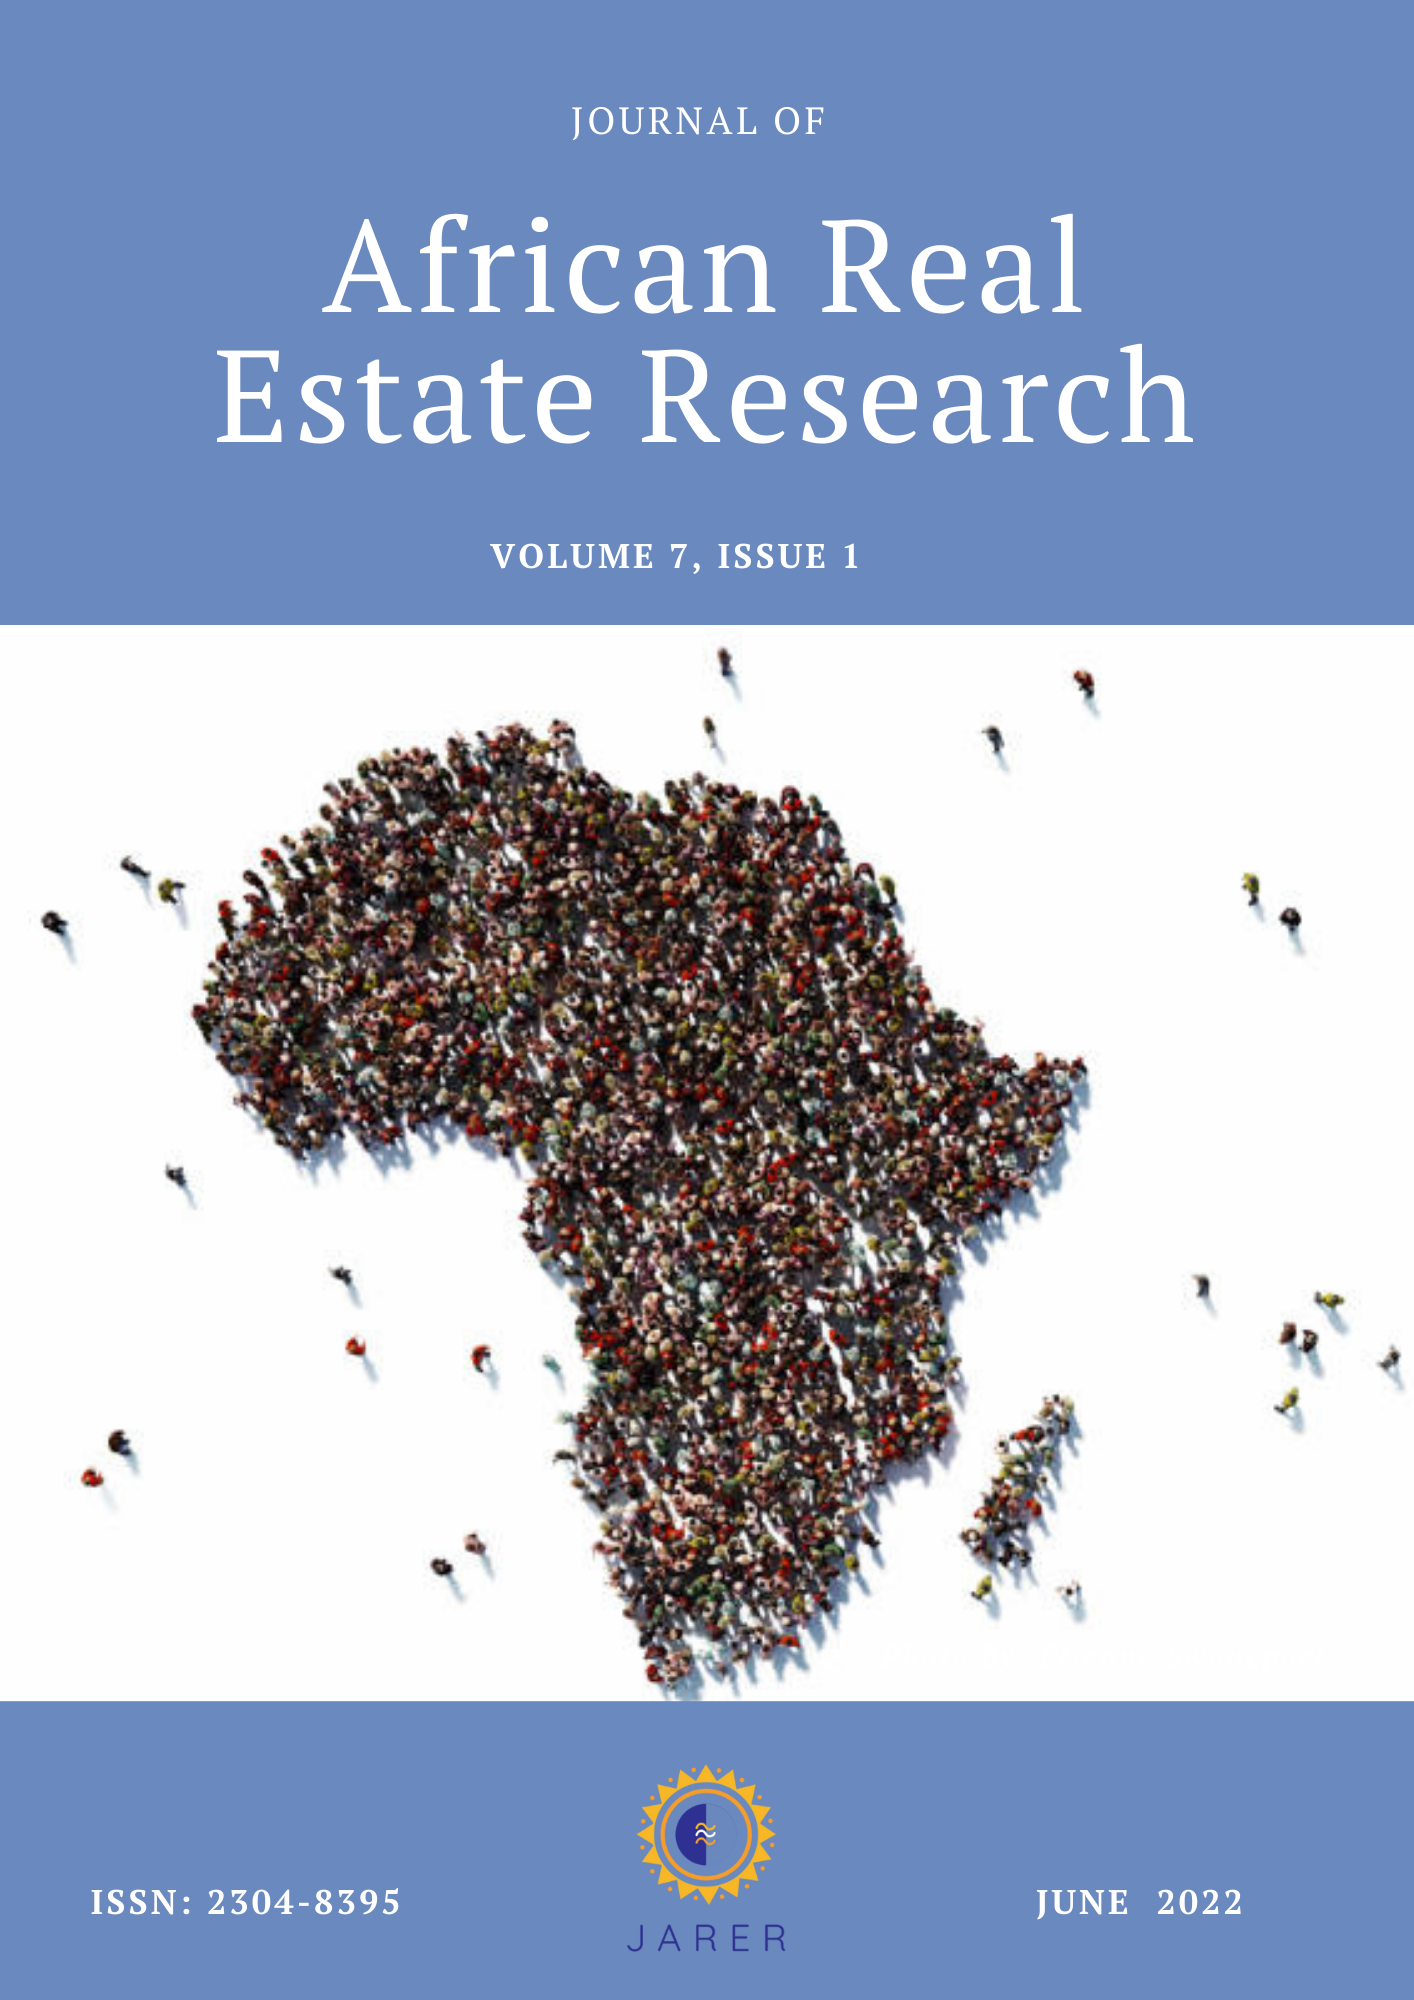 					View Vol. 7 No. 1 (2022): Journal of African Real Estate Research
				